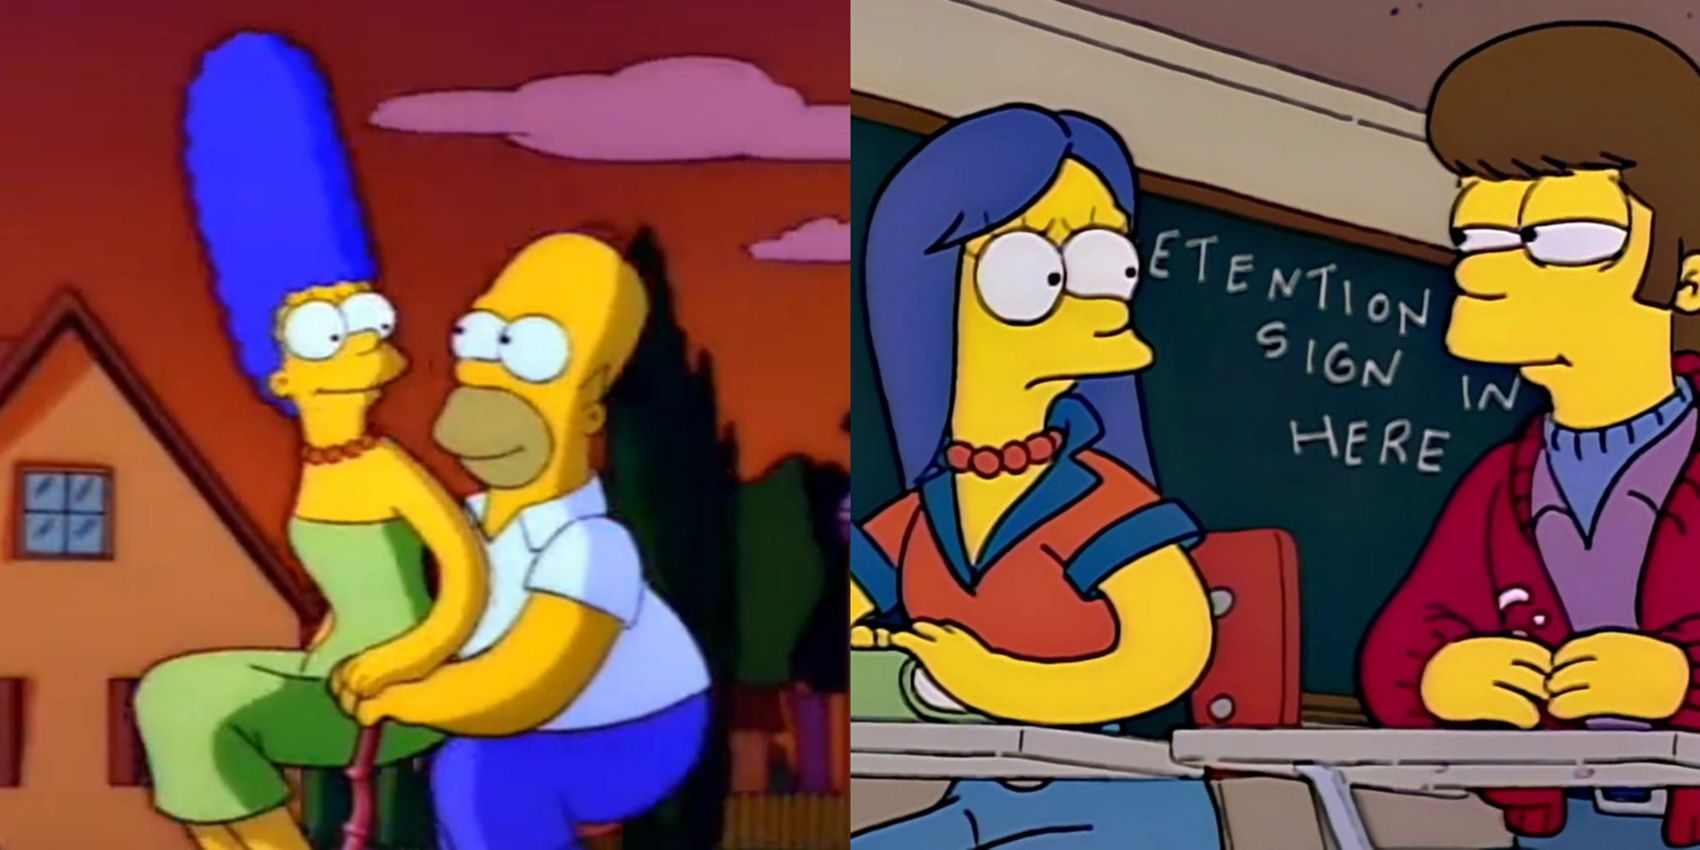 marg and homer simpson